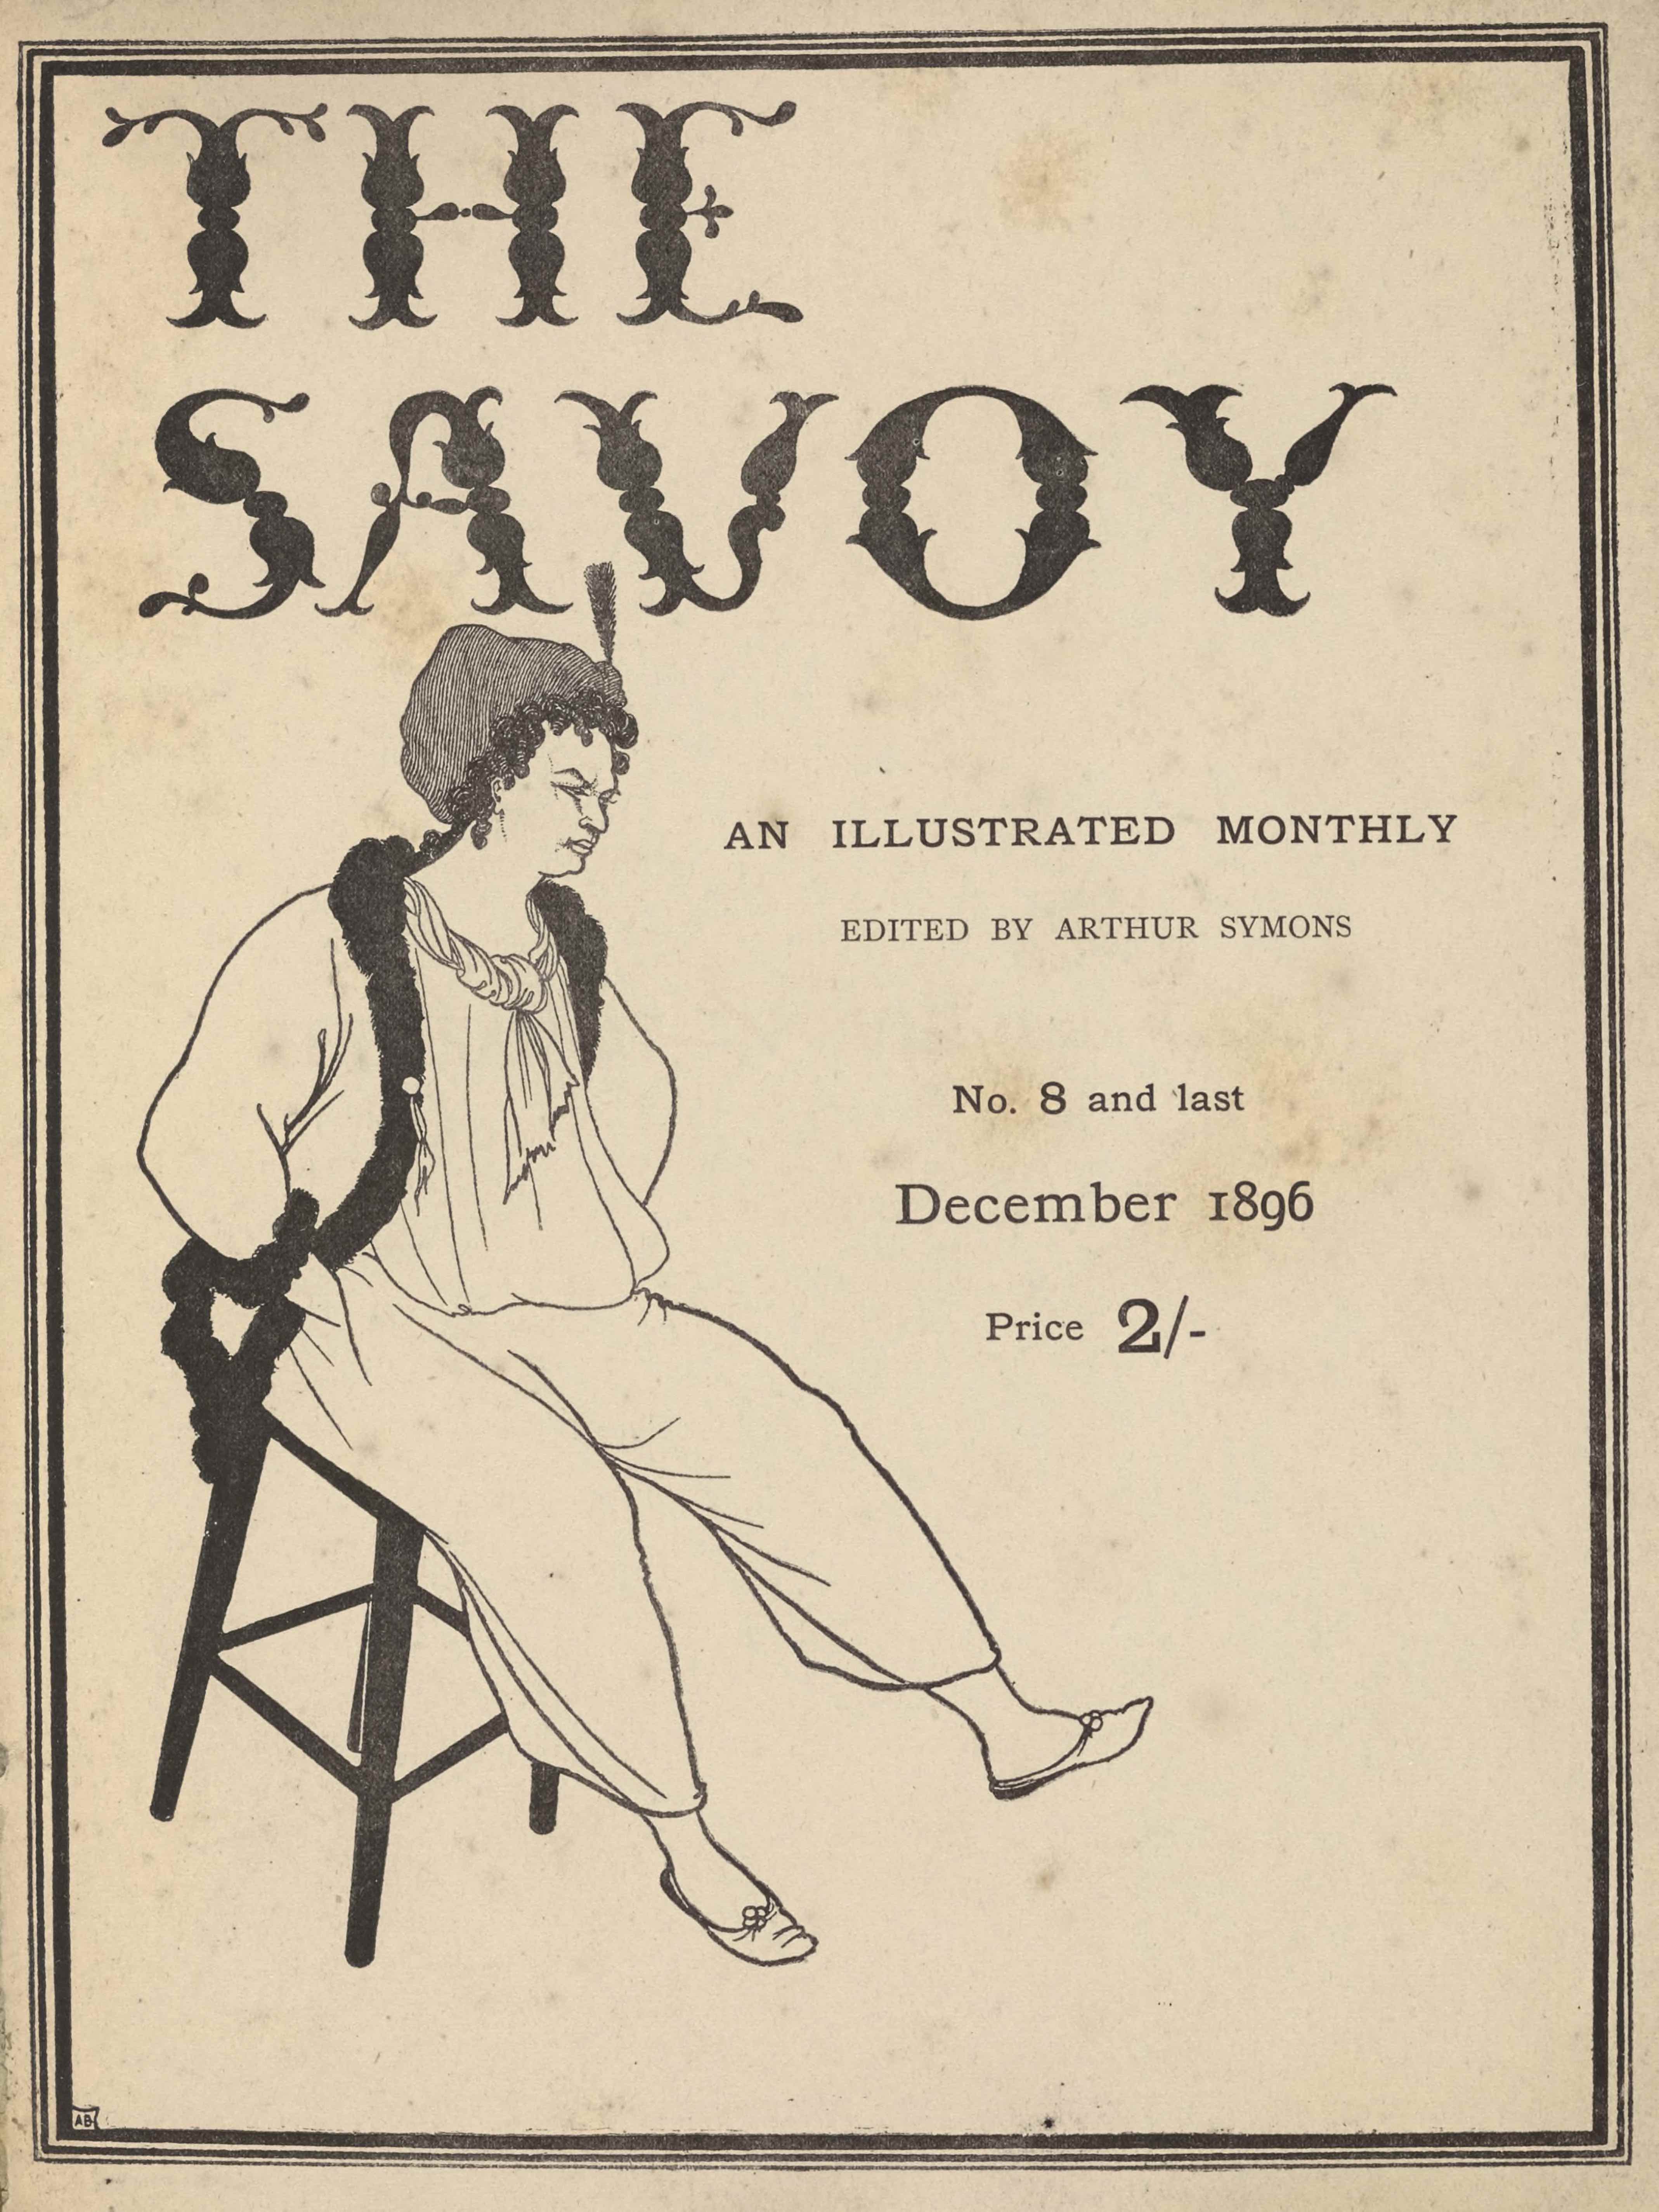 The triple-lined title page, in portrait orientation, combines a line-block reproduction of a pen-and-ink design with letterpress. Across the top of the page, in fancy black lettering, appears the title: “THE SAVOY” [large caps]. This title is done in a unique calligraphy consisting of flowers for the thicker sections of words and stems for the thinner parts. Halfway down the page, on the right, is is the subtitle in smaller font that reads: “AN ILLUSTRATED MONTHLY” [caps]. On the line below and printed in a lighter font reads: “EDITED BY ARTHUR SYMONS” [small caps]. On the subsequent line below is printed: “No. 8 and last”. In bigger font below that the date of publication reads: “December 1896.” And below that reads: “Price 2/-”. Below the title and to the left of the publishing information sits a figure, possibly a Pierrot, that takes up the majority of the left half of the page. The figure, who seems to be male, is sitting on a stool facing right; the stool is tilted forward with the back legs off the ground. He has his hands in his trouser pockets and a furrowed brow. He has curly black hair that extends part way down his neck and a grey cap over top. The figure has a white ascot tied around his neck and a loose white tunic tucked into baggy white trousers. He has an unbuttoned overcoat, the edges of which are black and textured like thick fur. The figure is wearing plain slippers.